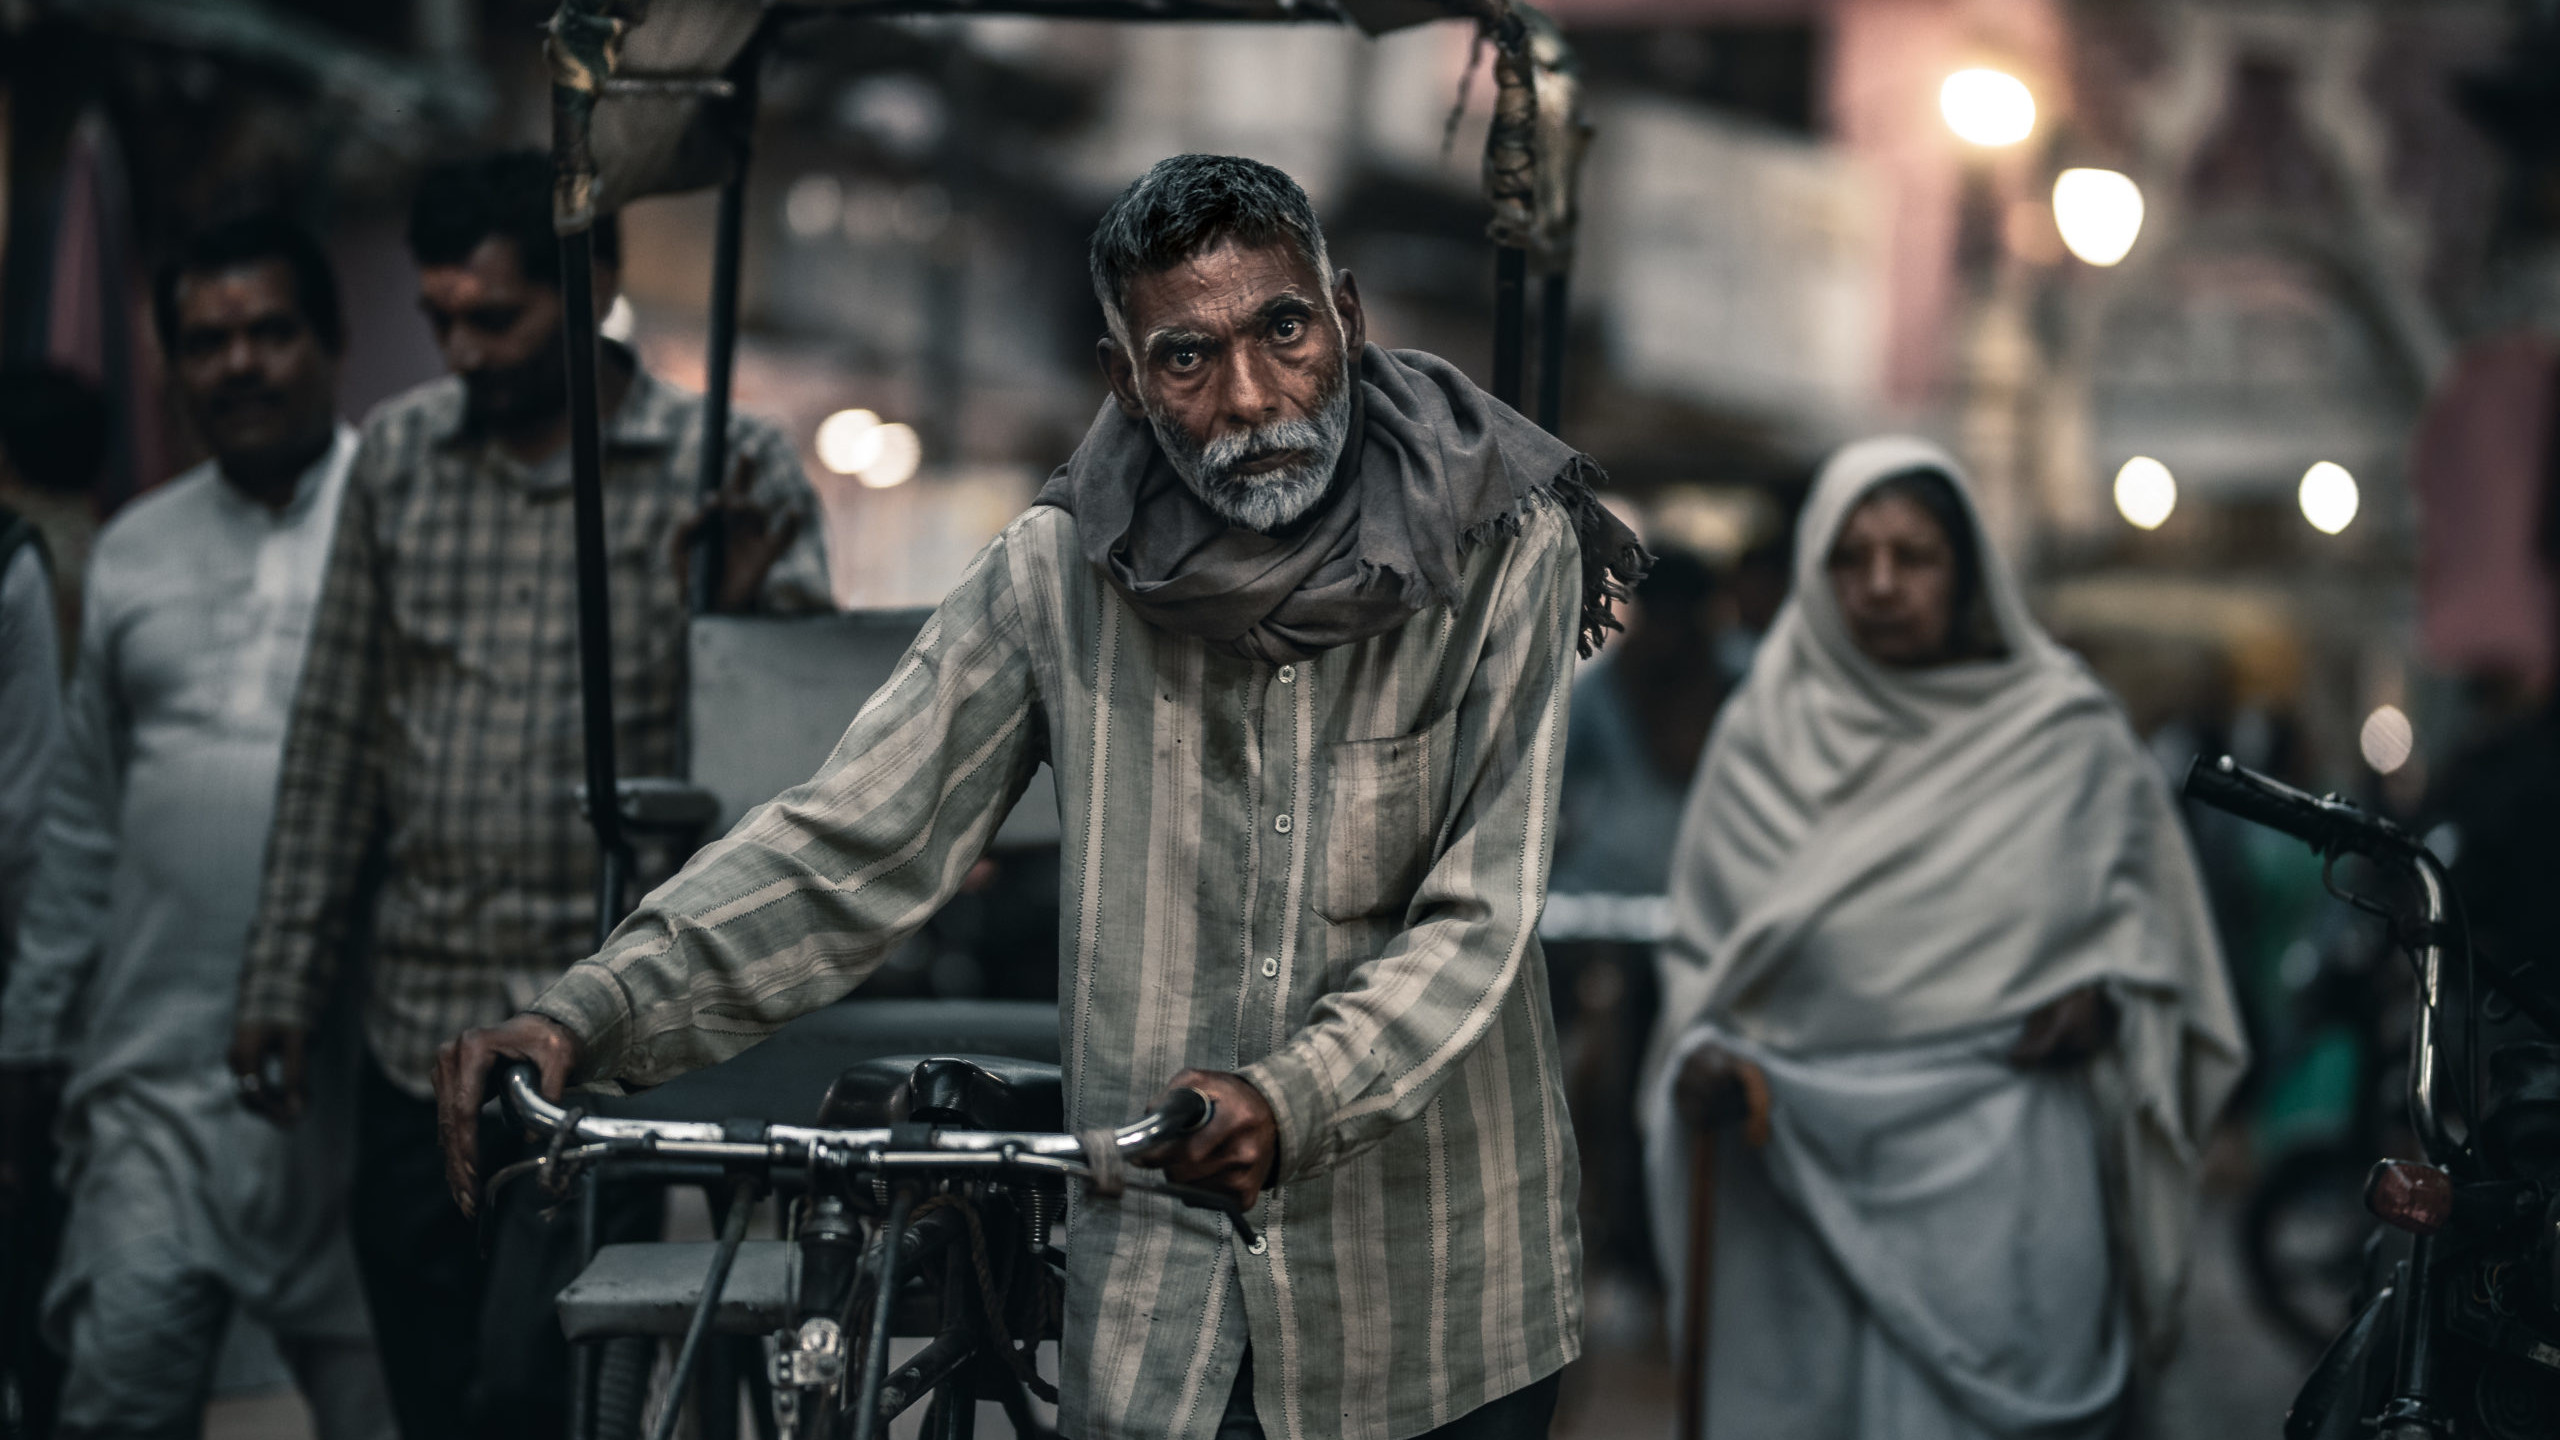 Portrait street photography of a rickshaw driver walking in the streets of Mathura, India